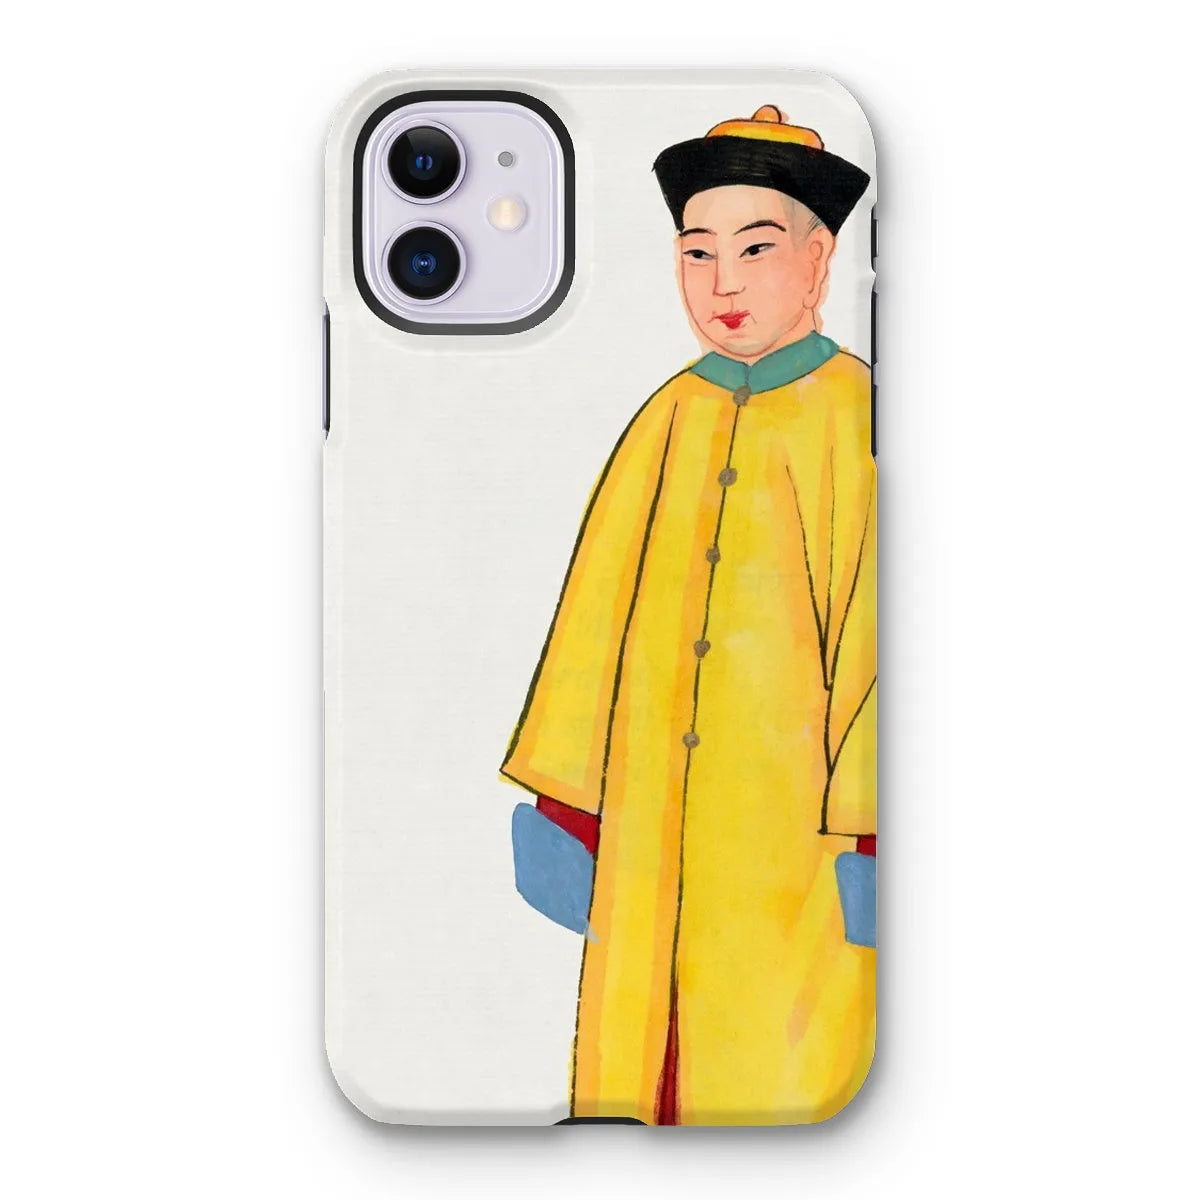 Priest In Yellow Robes - Chinese Aesthetic Art Phone Case - Iphone 11 / Matte - Mobile Phone Cases - Aesthetic Art